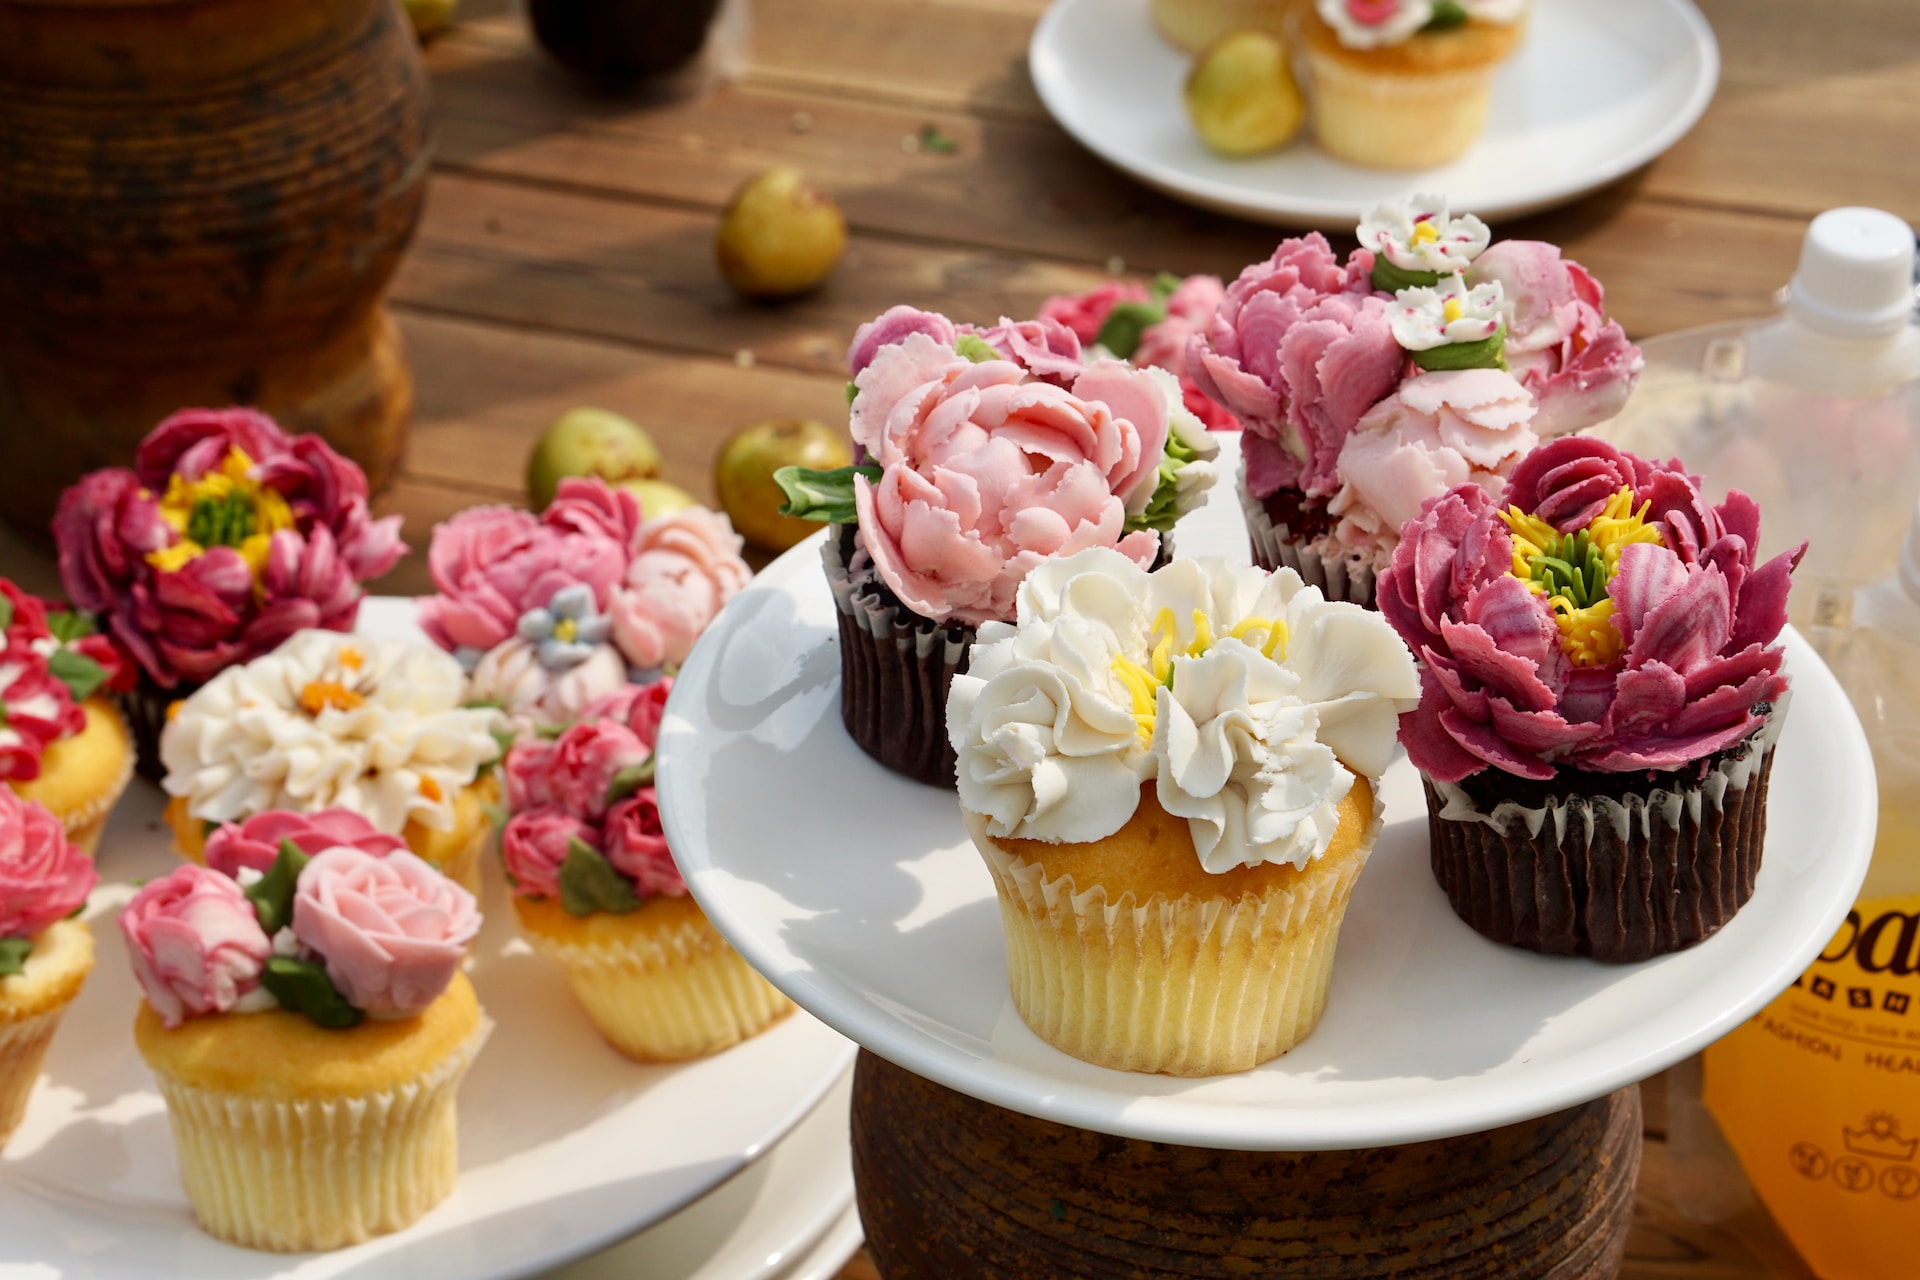 Two plates of vanilla and chocolate cupcakes with colourful floral icing.